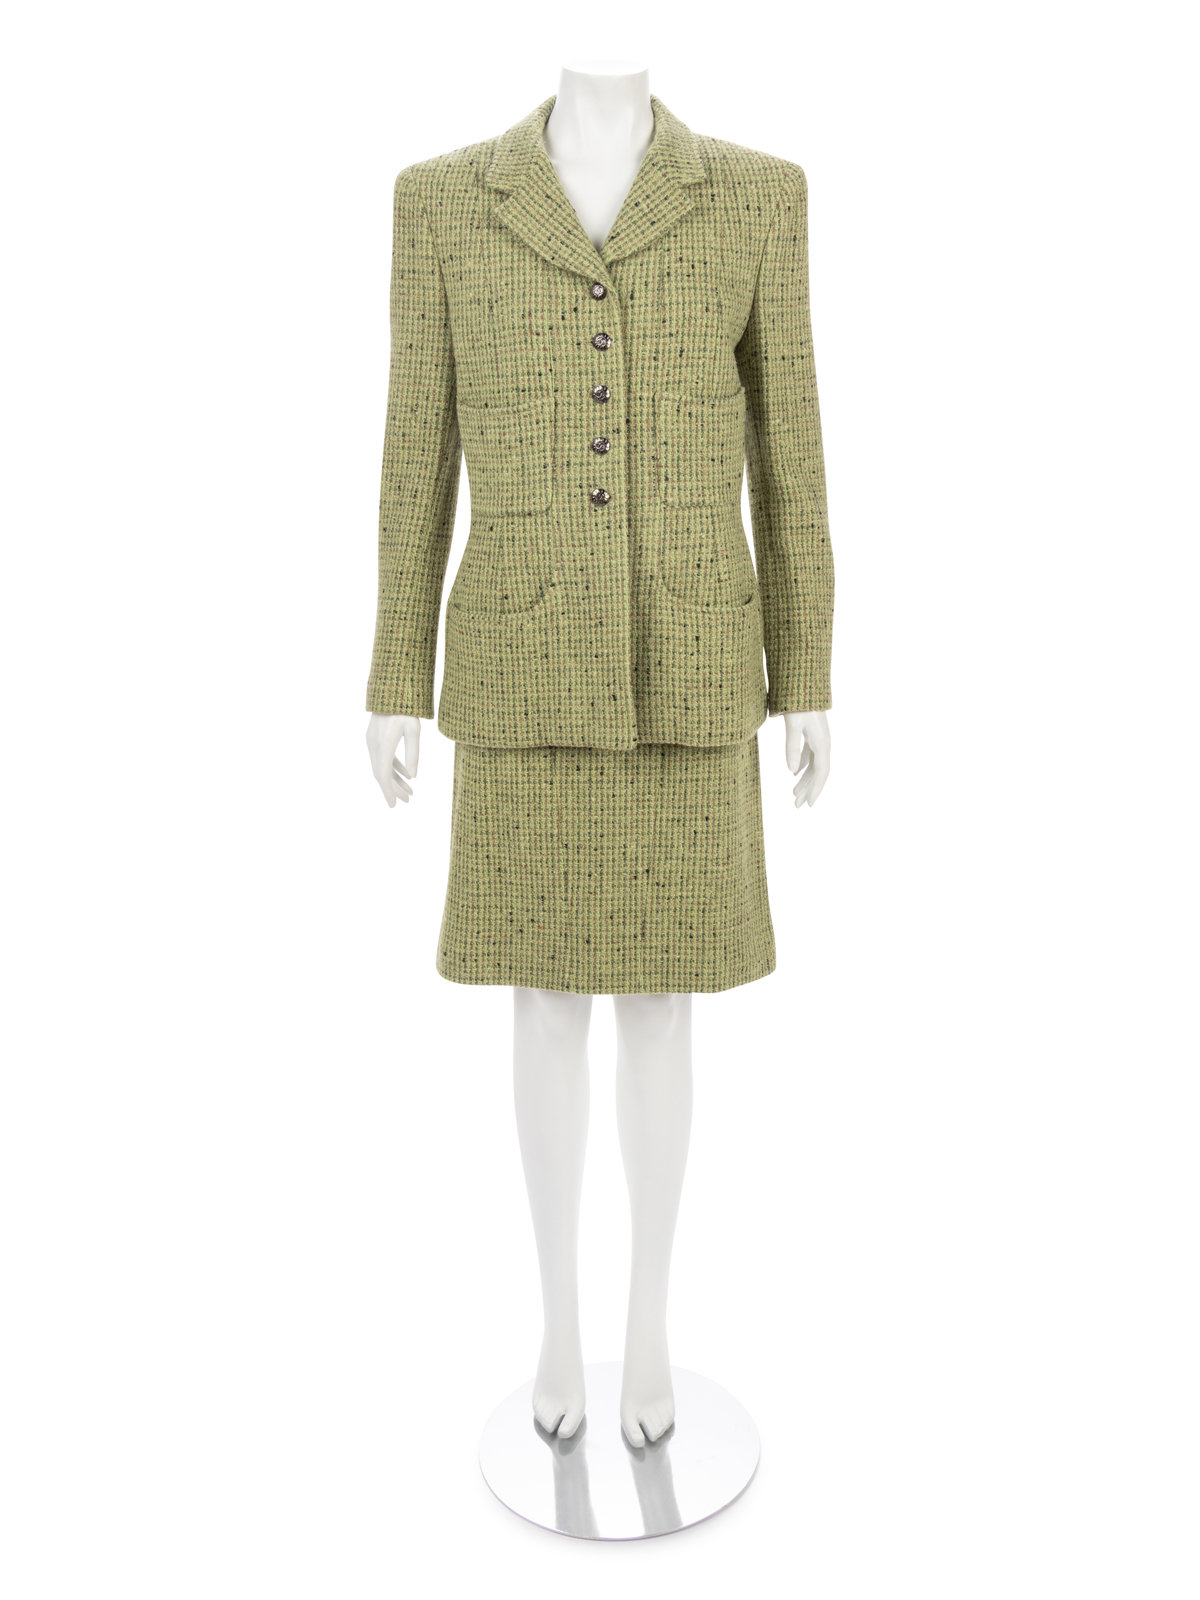 Chanel Tweed Two-Piece Skirt Suit, Fall 1997